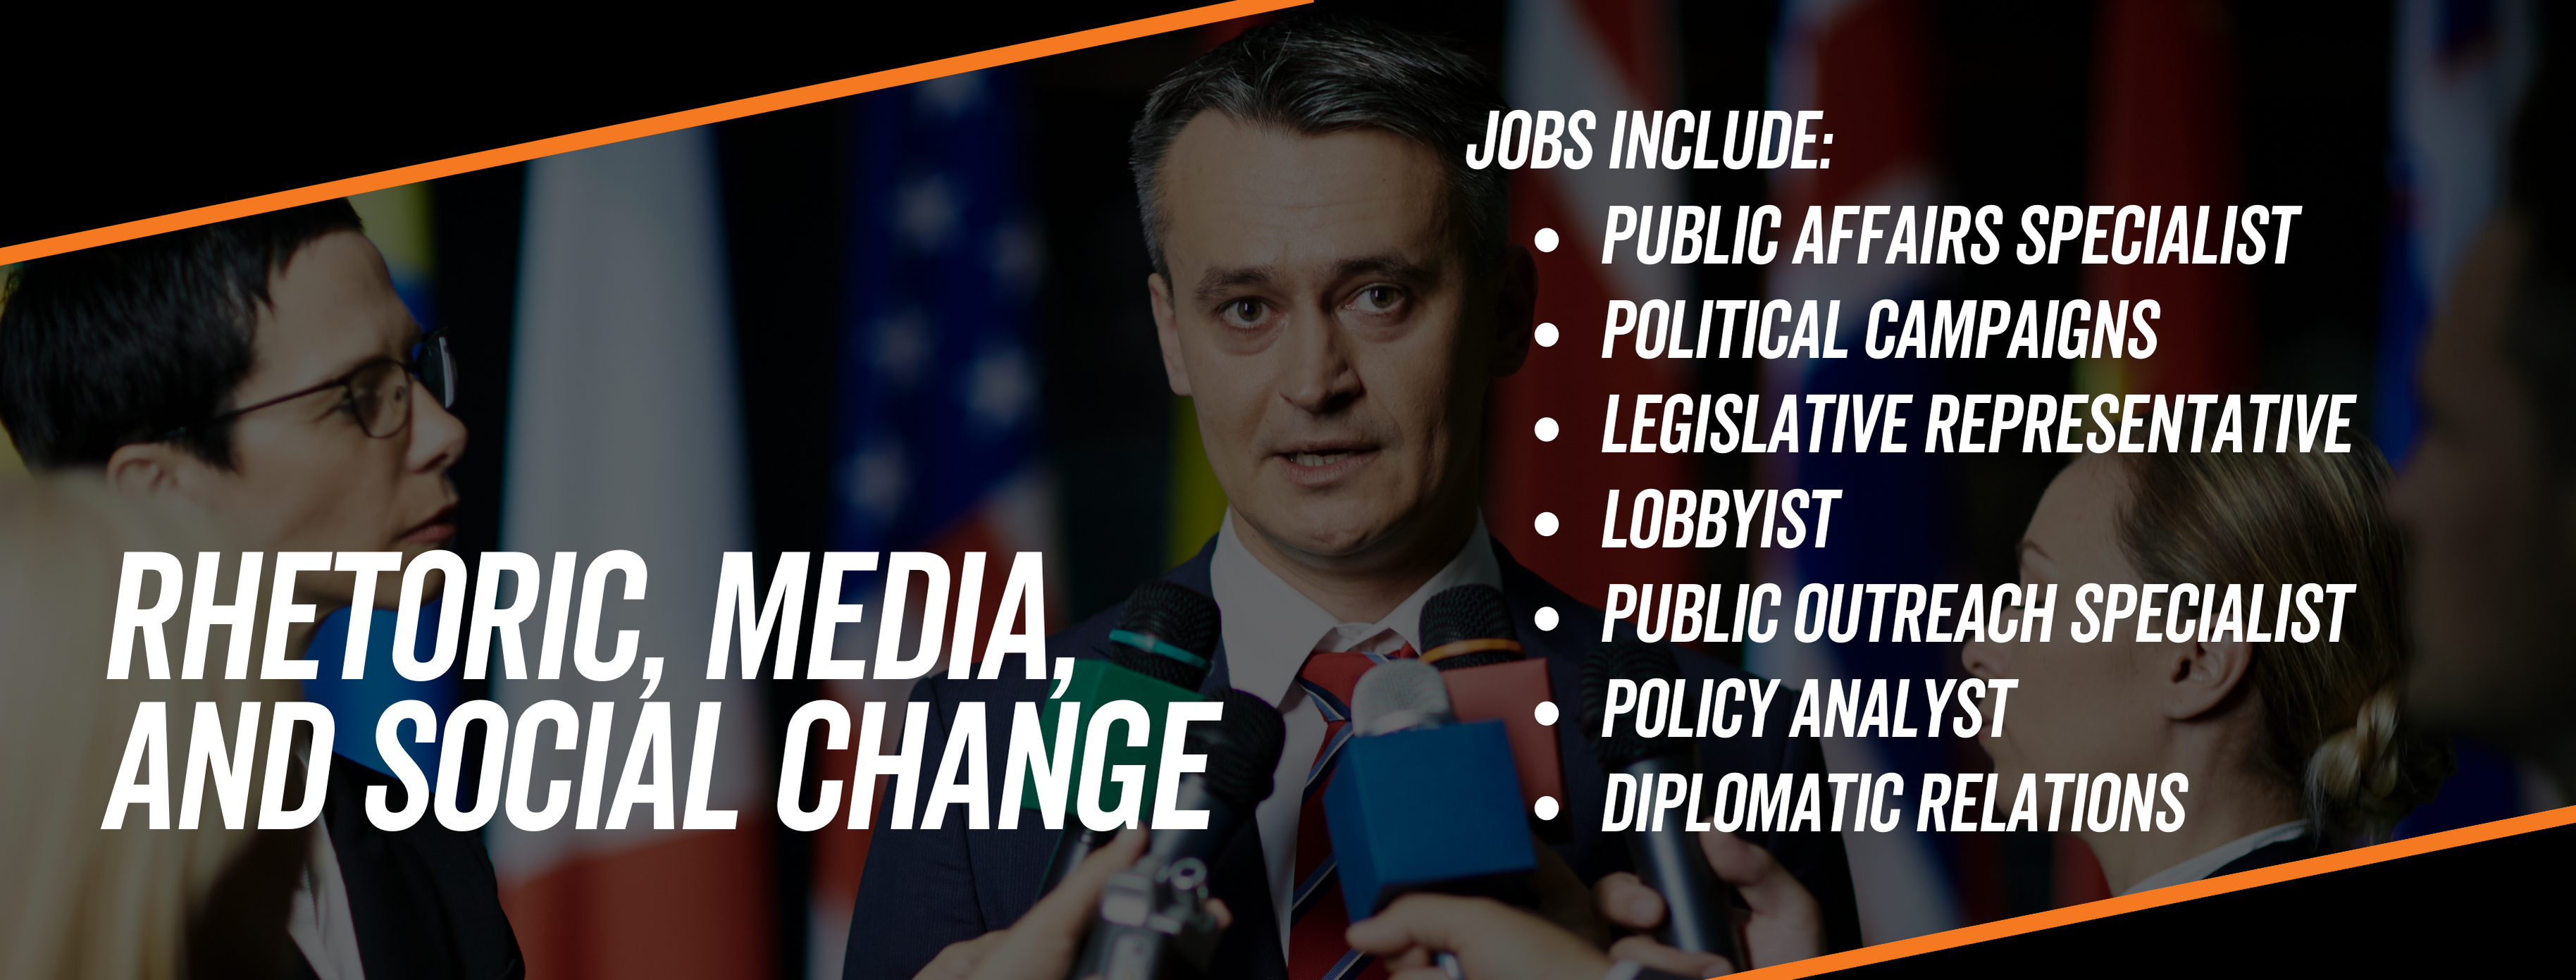 Rhetoric, media, and social change jobs include public affairs specialists, political campaigns, legislative representative, lobbyist, public outreach specialist, policy analyst, diplomatic relations